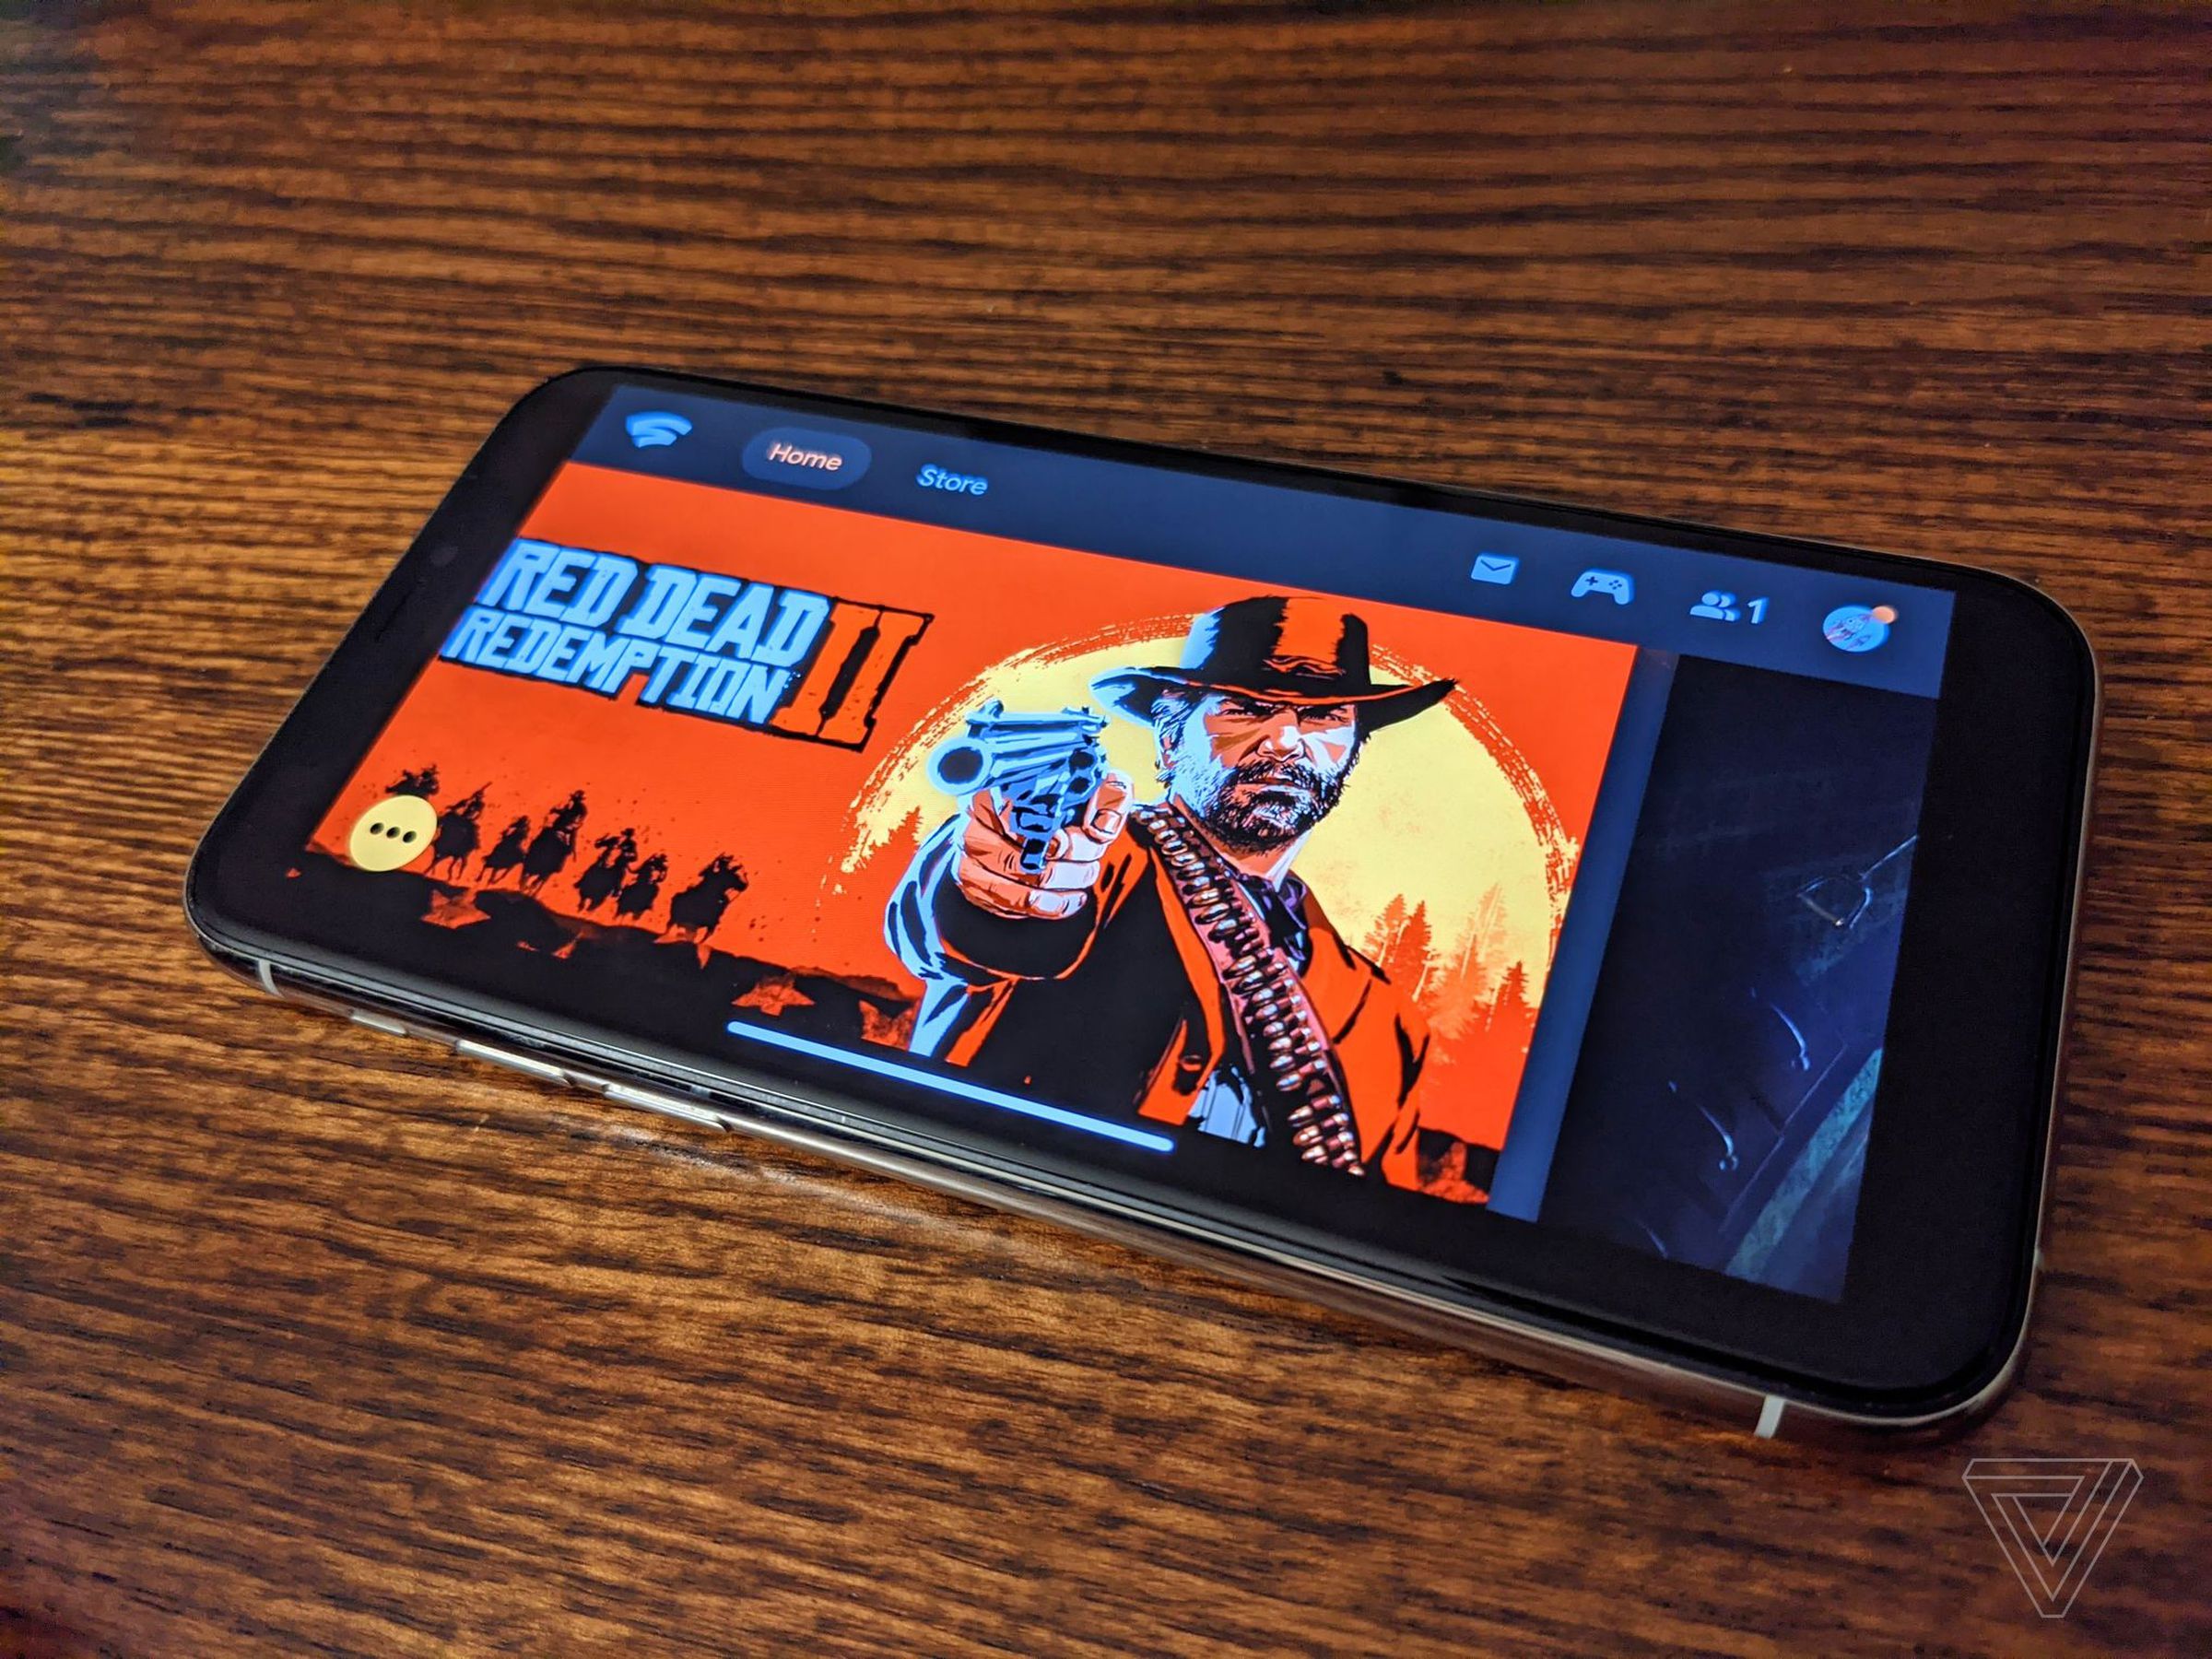 Red Dead Redemption 2 on an iPhone via Stadia.